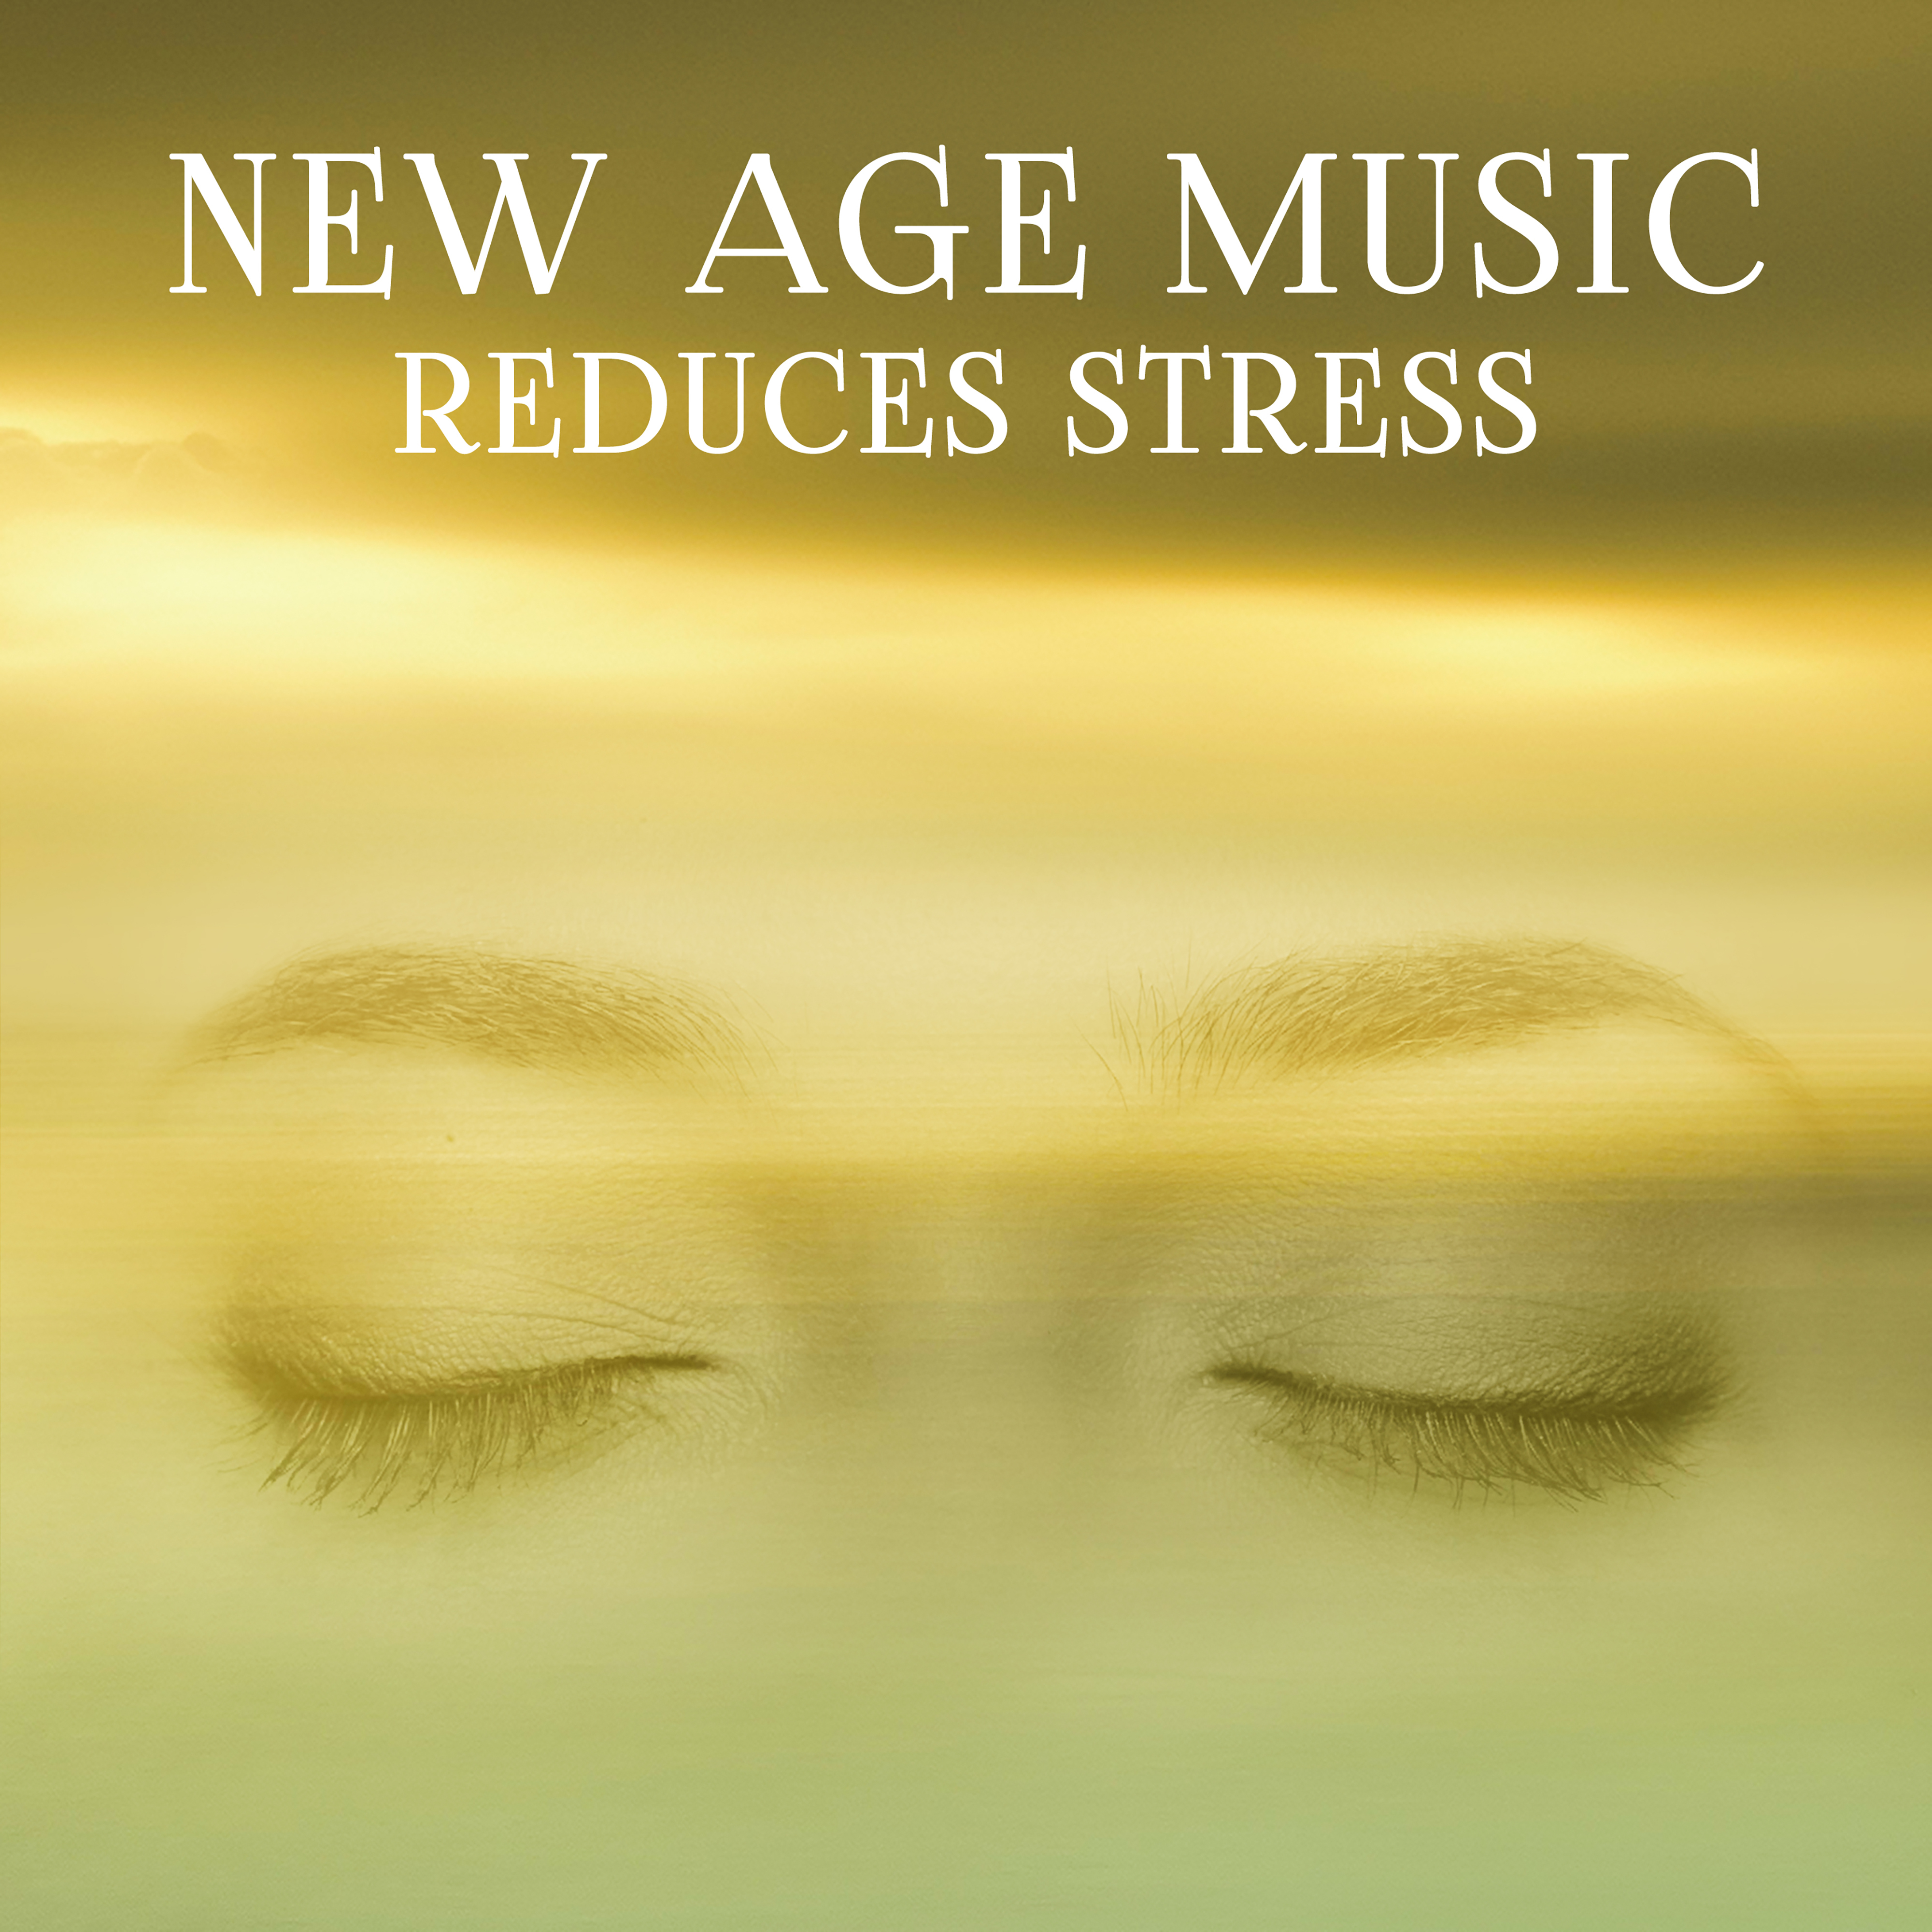 New Age Music Reduces Stress  Calm Down, Healing Lullabies, Stress Free, Soft Sounds for Relaxation, Sleep, Pure Mind